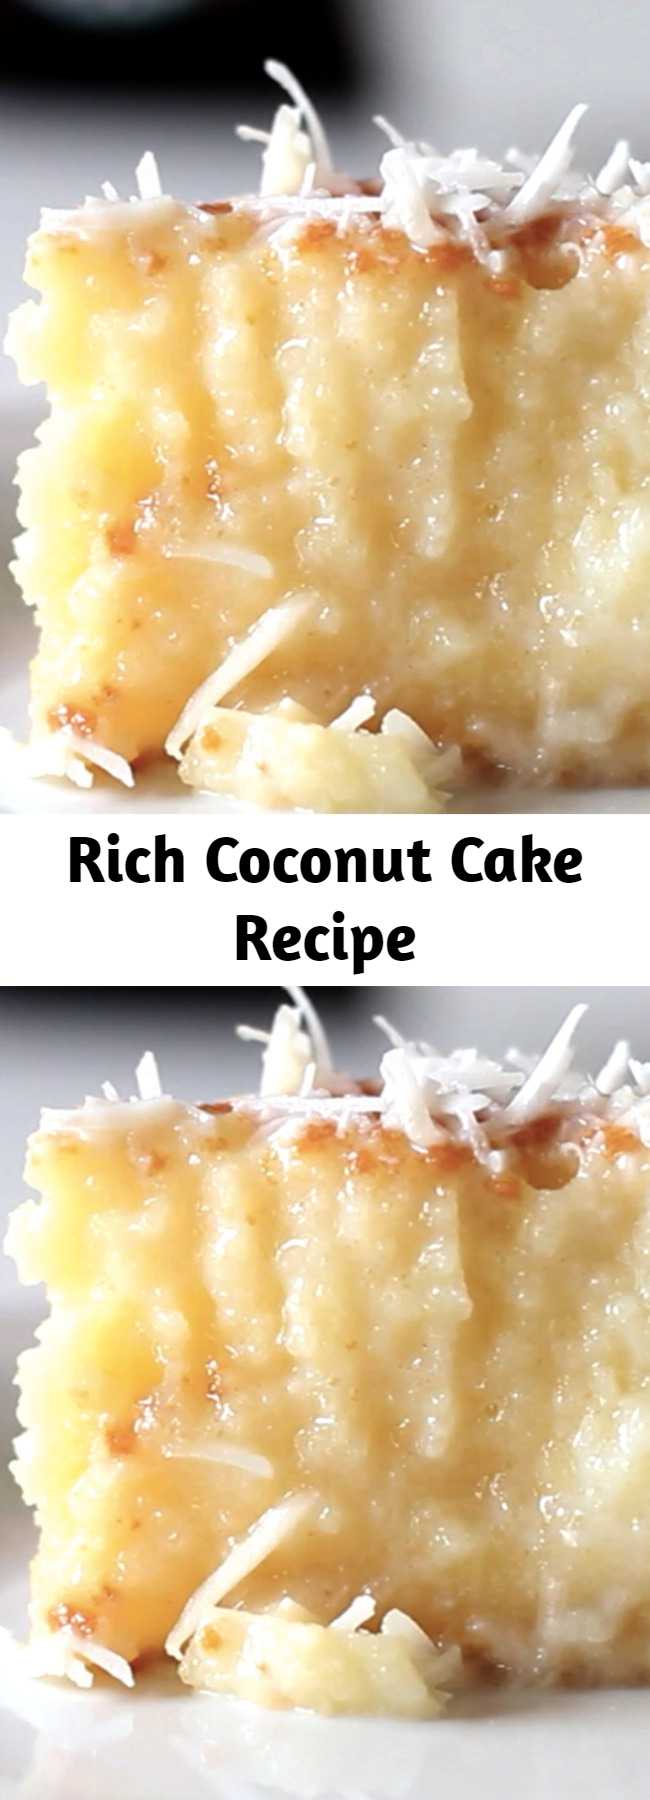 Rich Coconut Cake Recipe - A cake with a rich coconut base and grated coconut topping.